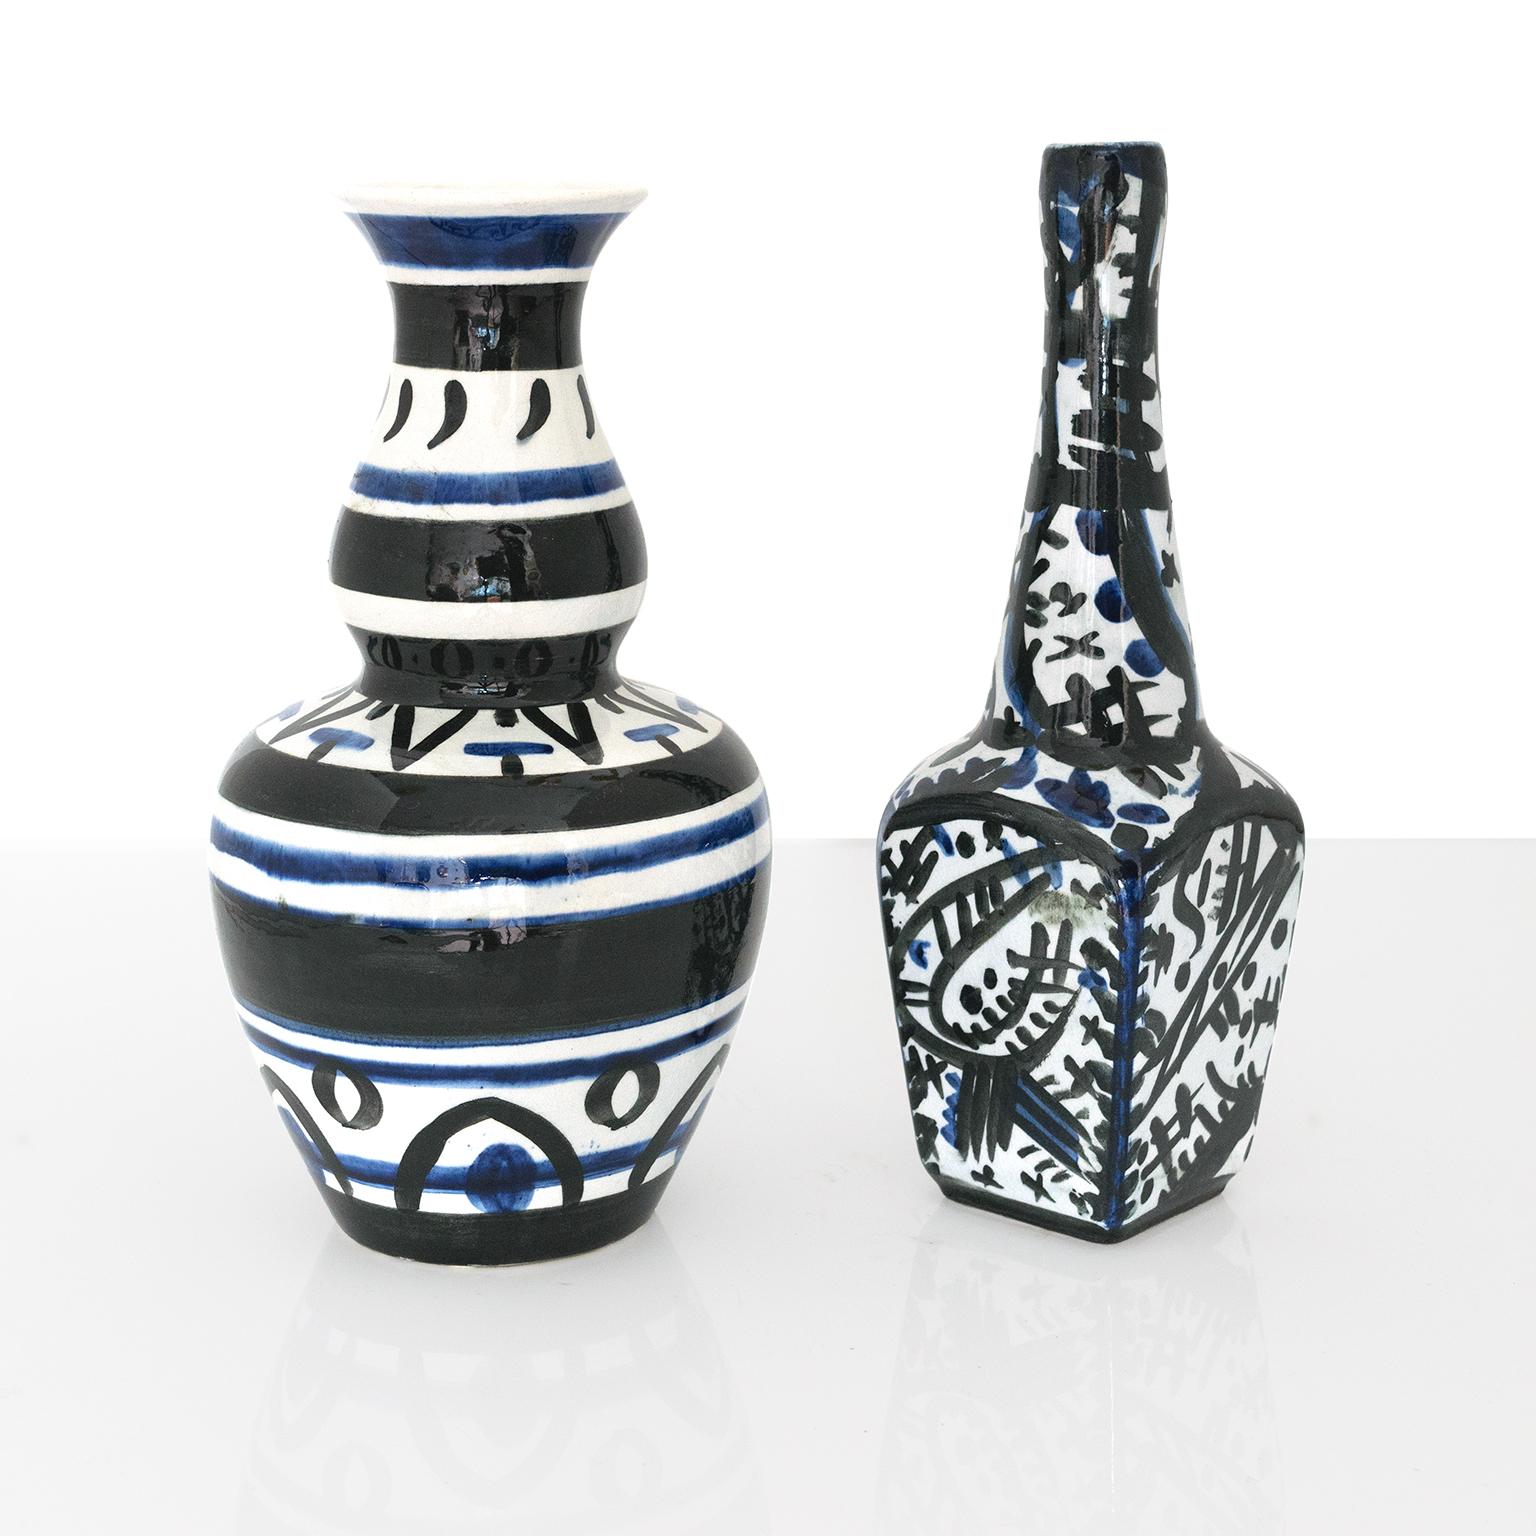 Two avant garde hand decorated ceramic vases by Edward Hald circa 1920’s. Hold used blue and black glazes on white bodies to create abstract and geometric patterns, Produced by Rorstrand 1920’s, Sweden